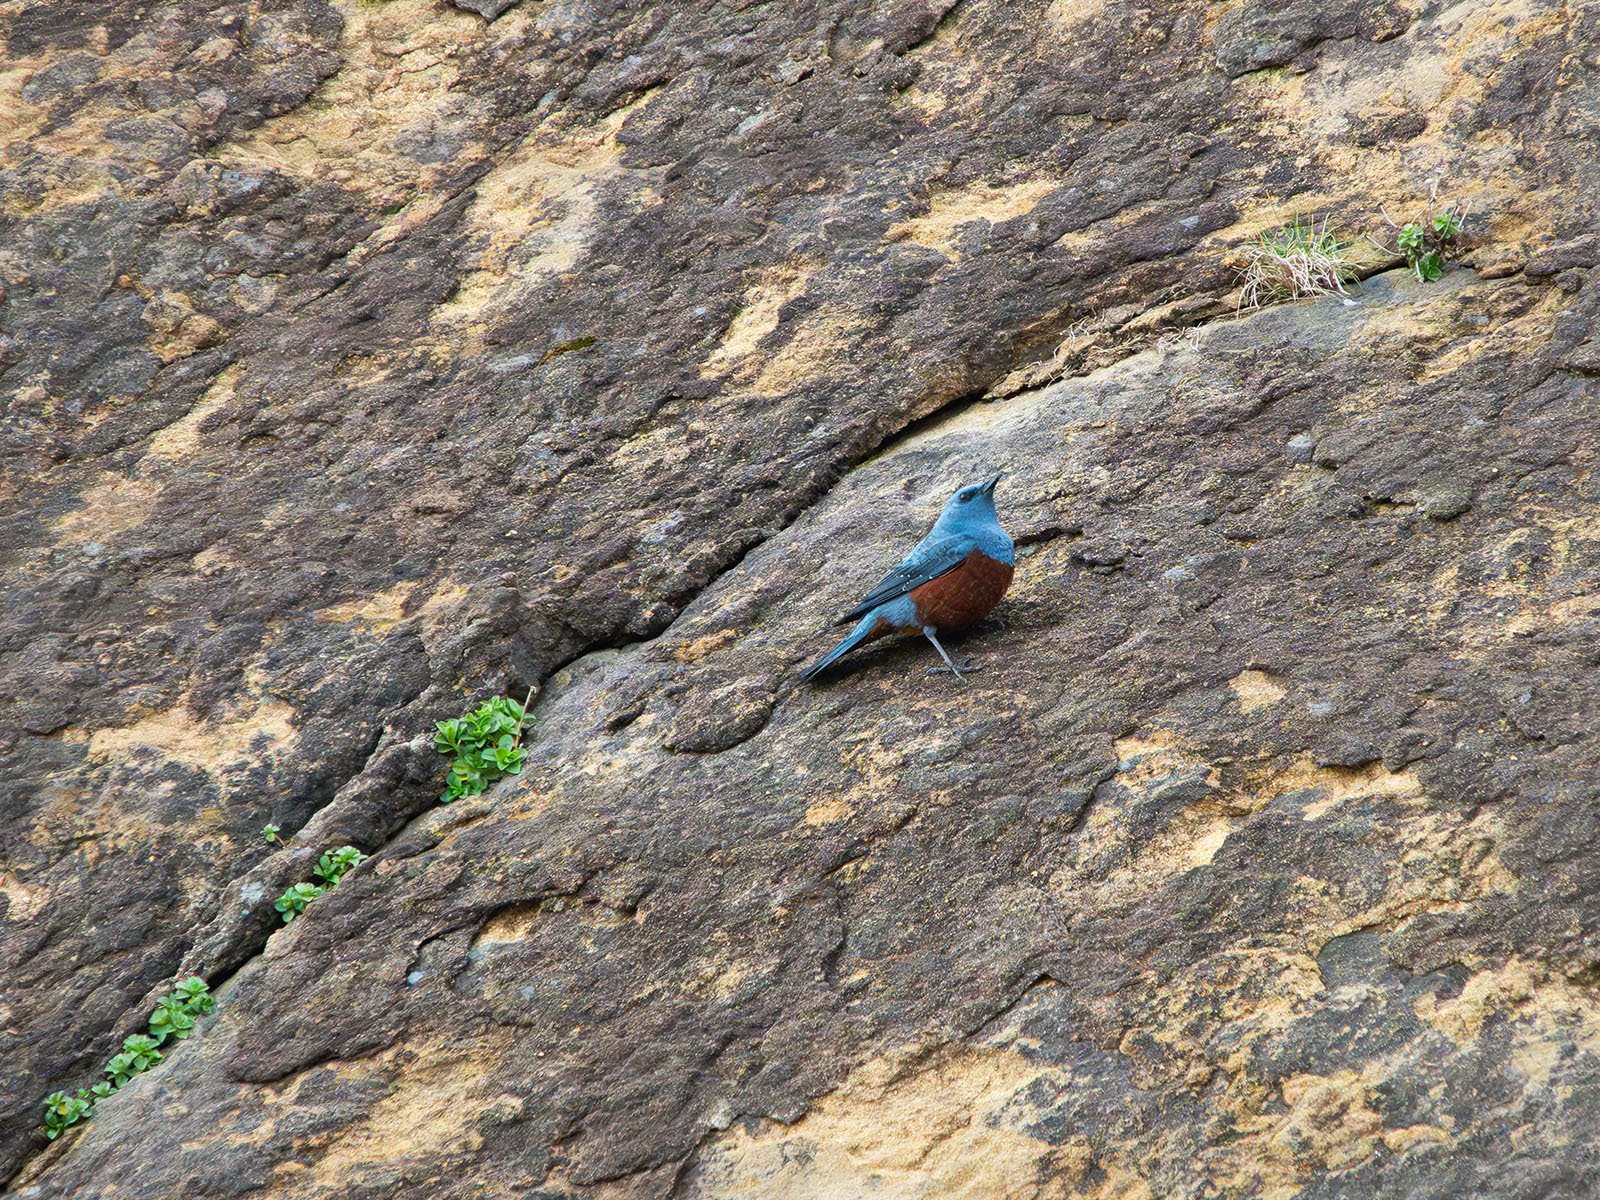 A blue rock thrush perched on a rugged, textured rock face with small patches of green vegetation.